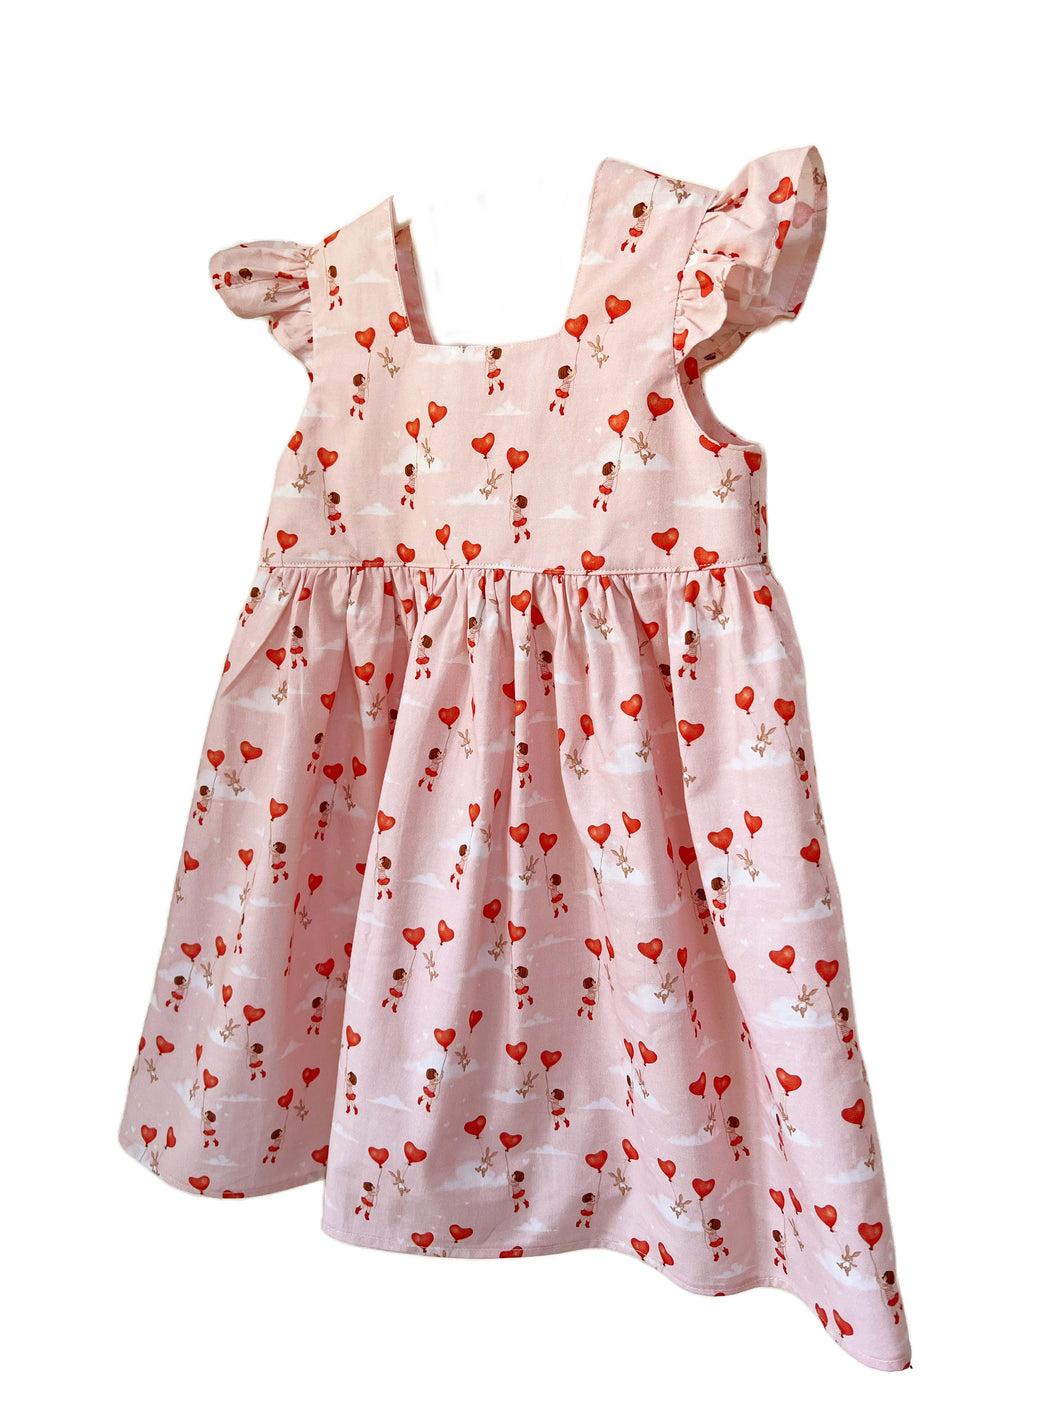 Made to Order Child's 'Polly' Dress